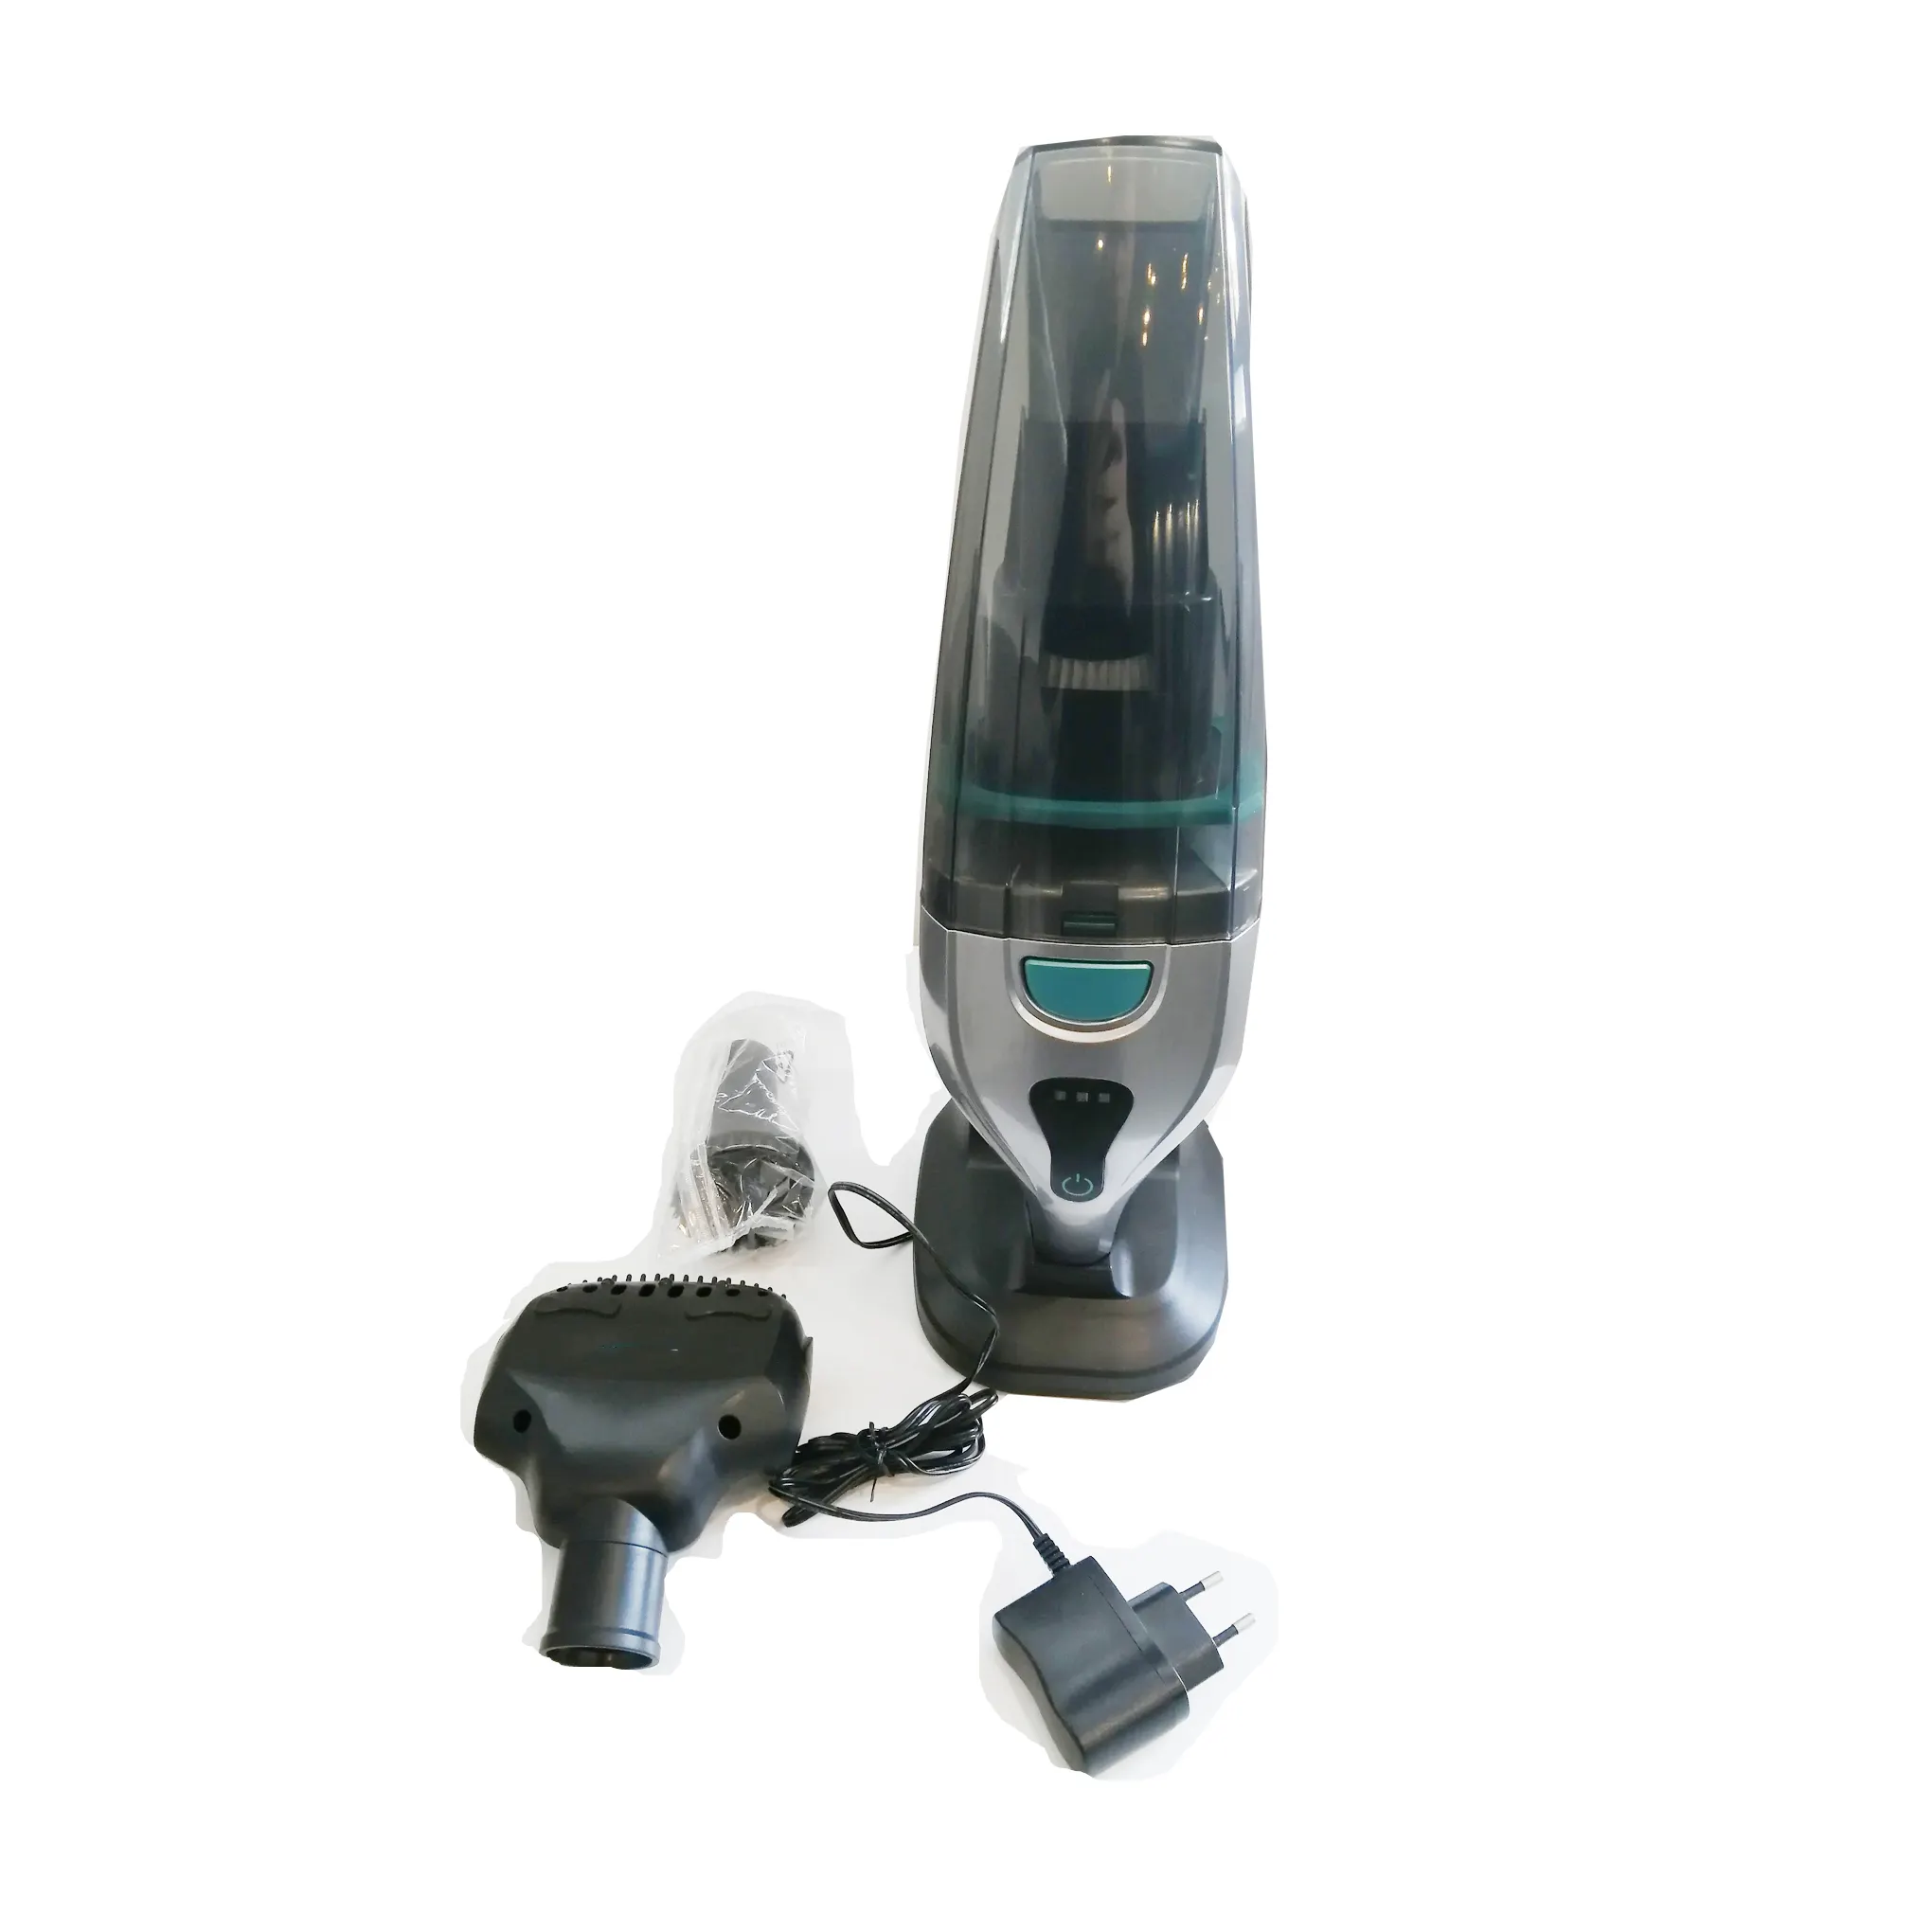 Dust mite vacuum cleaner handheld injection handy cordless vacuum cleaners